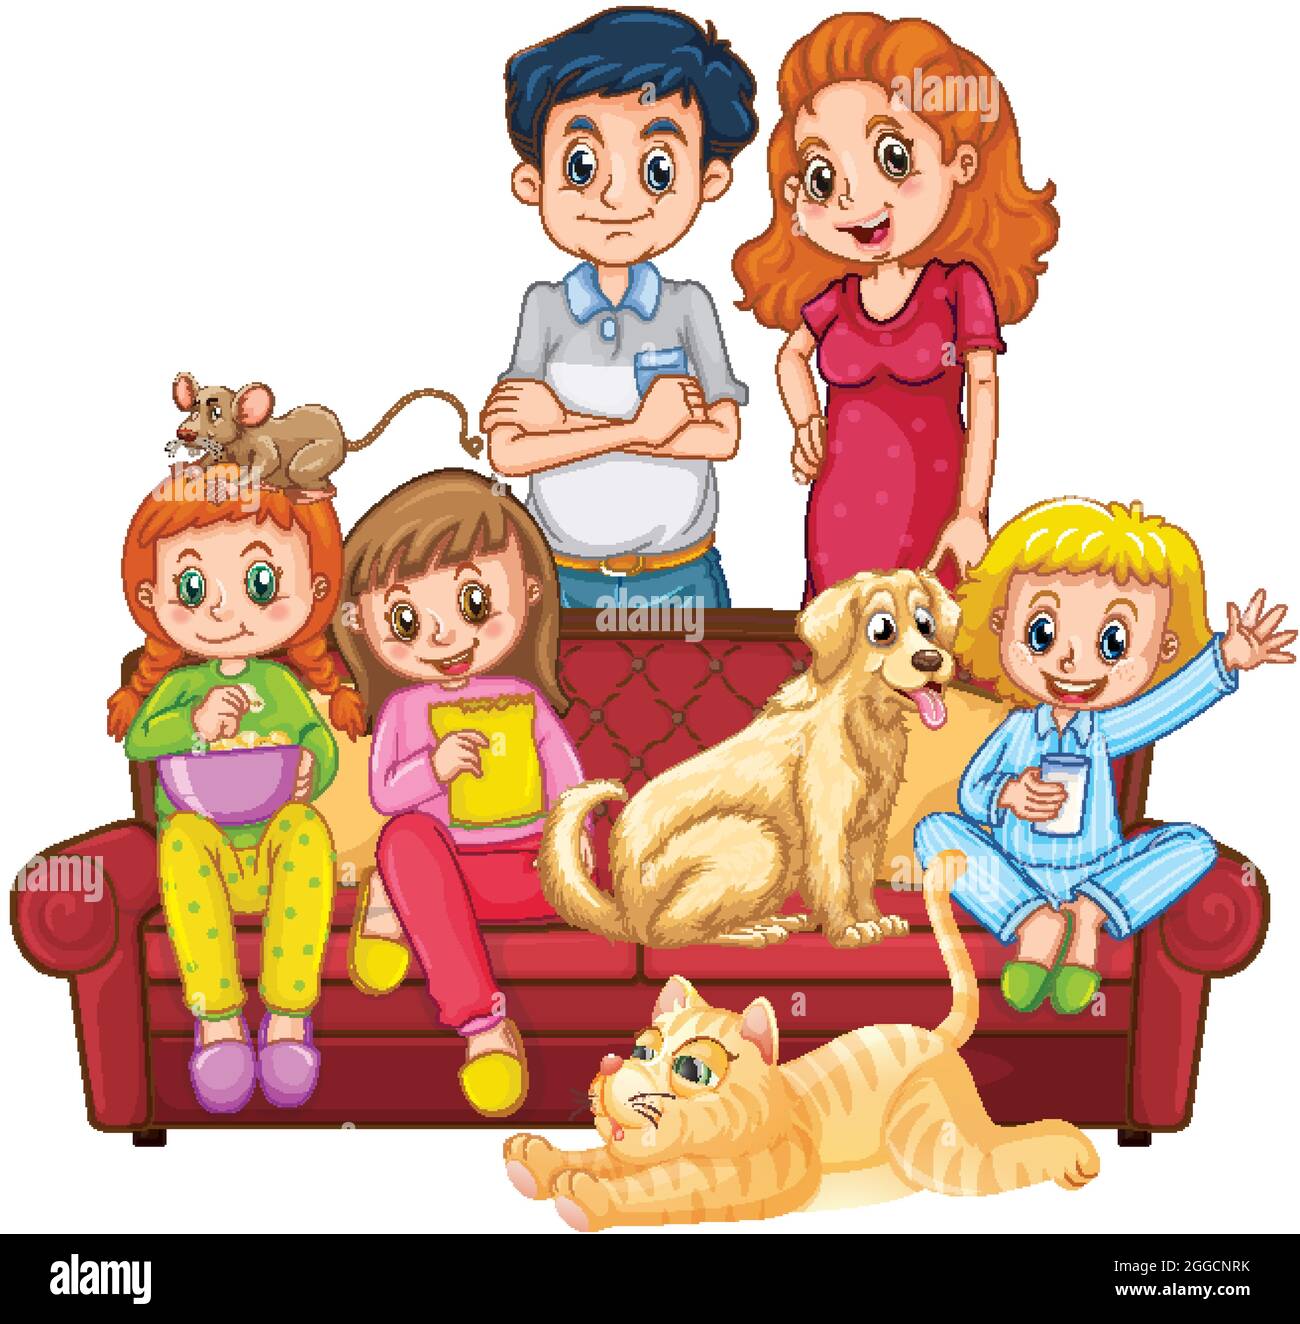 clipart of family members